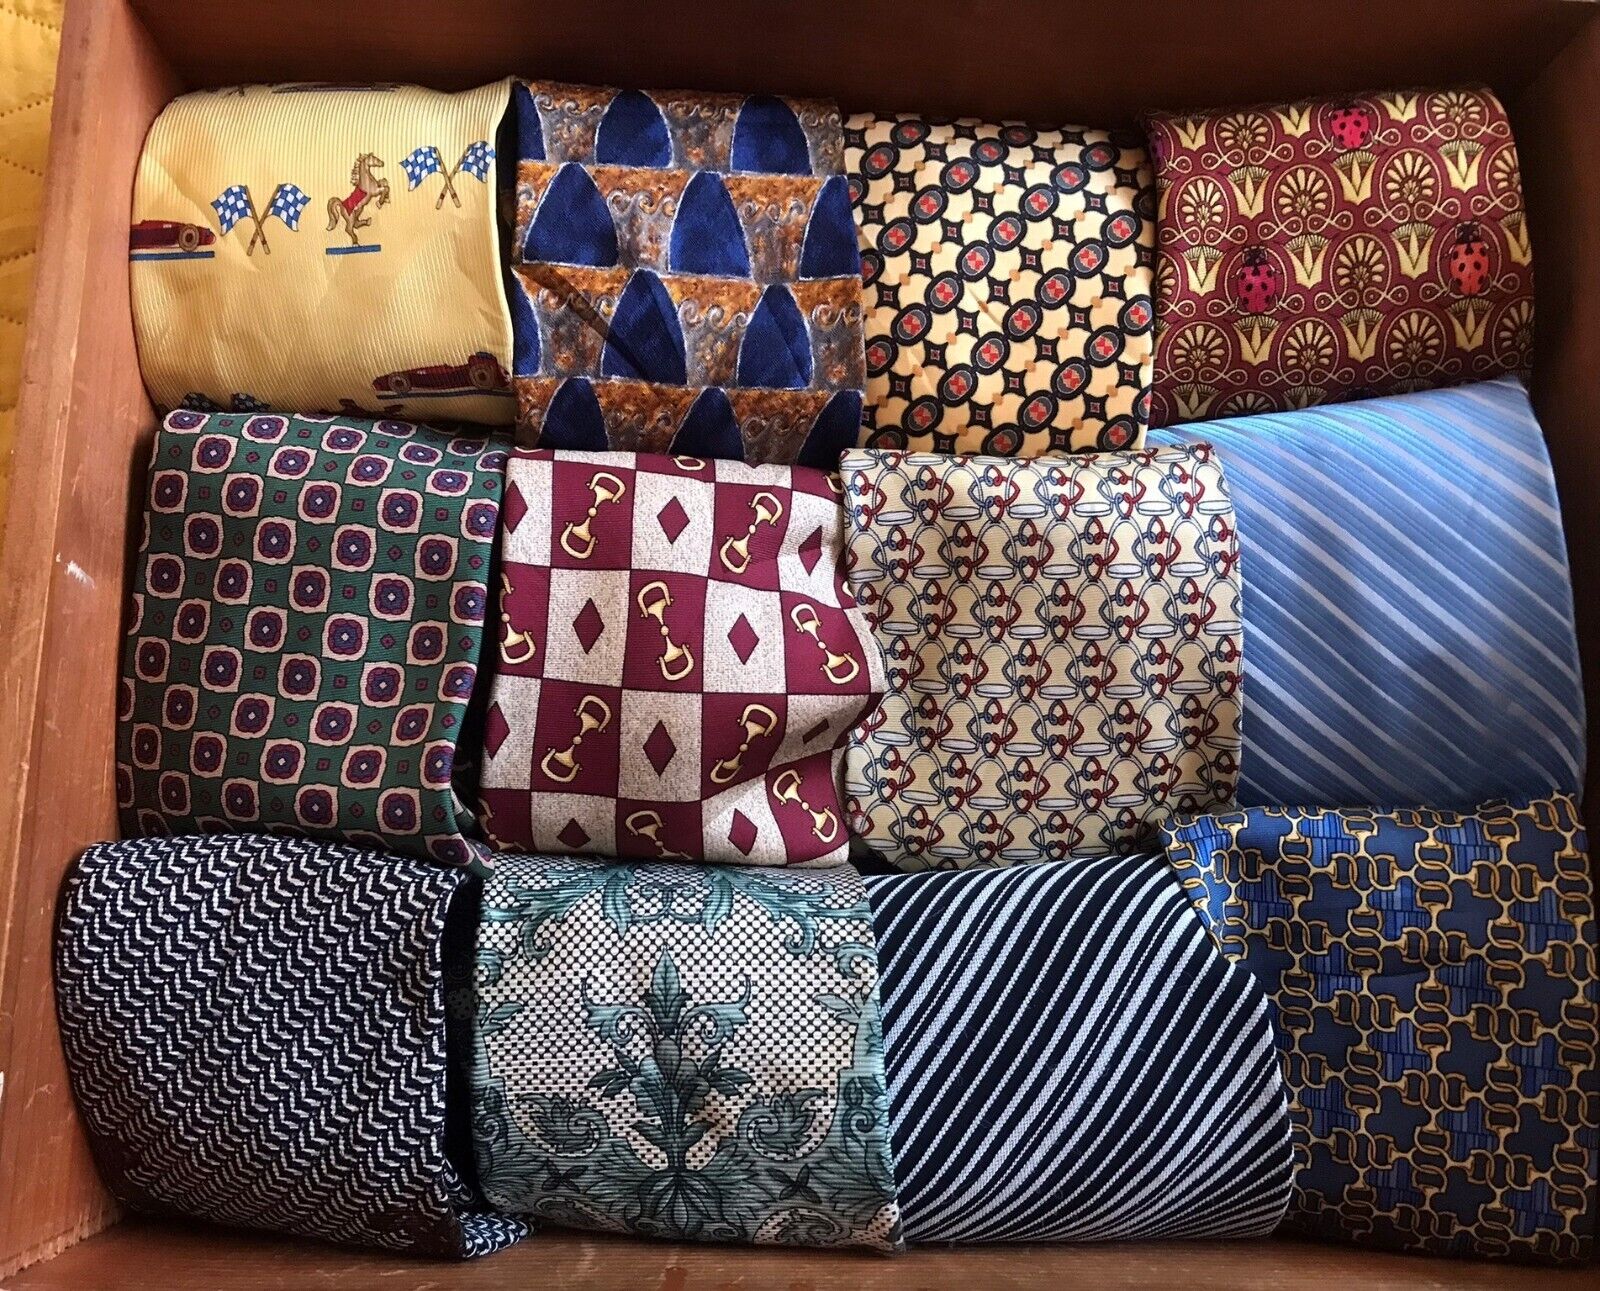 BRIONI,DIOR,YVES SAINT LAURENT,ZEGNA,ARMANI... LOT OF MORE 100 TIES COLLECTION